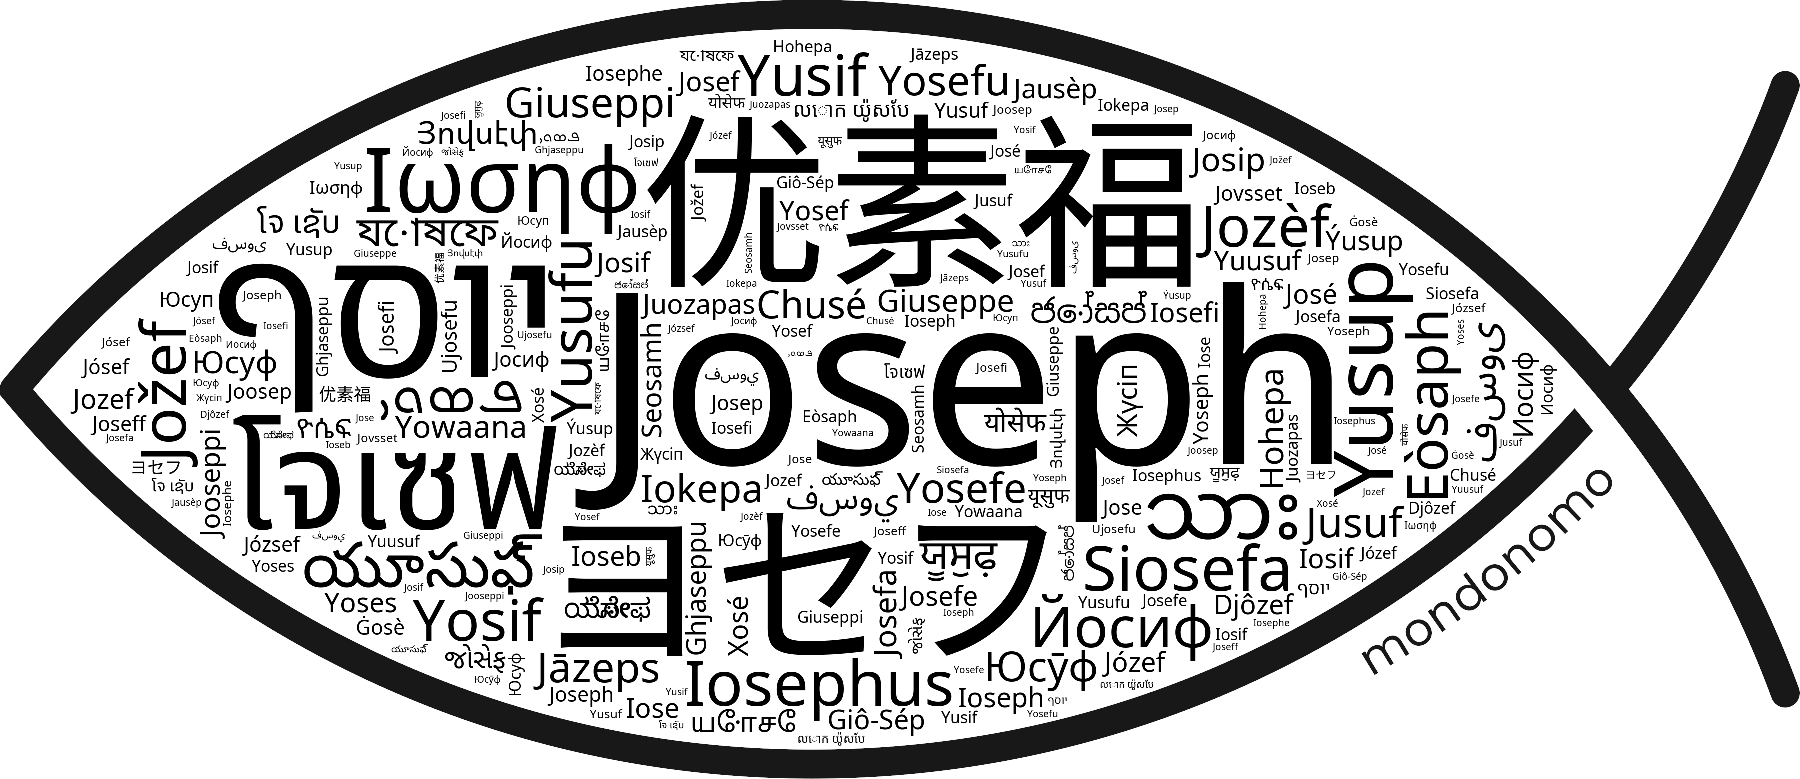 Name Joseph in the world's Bibles